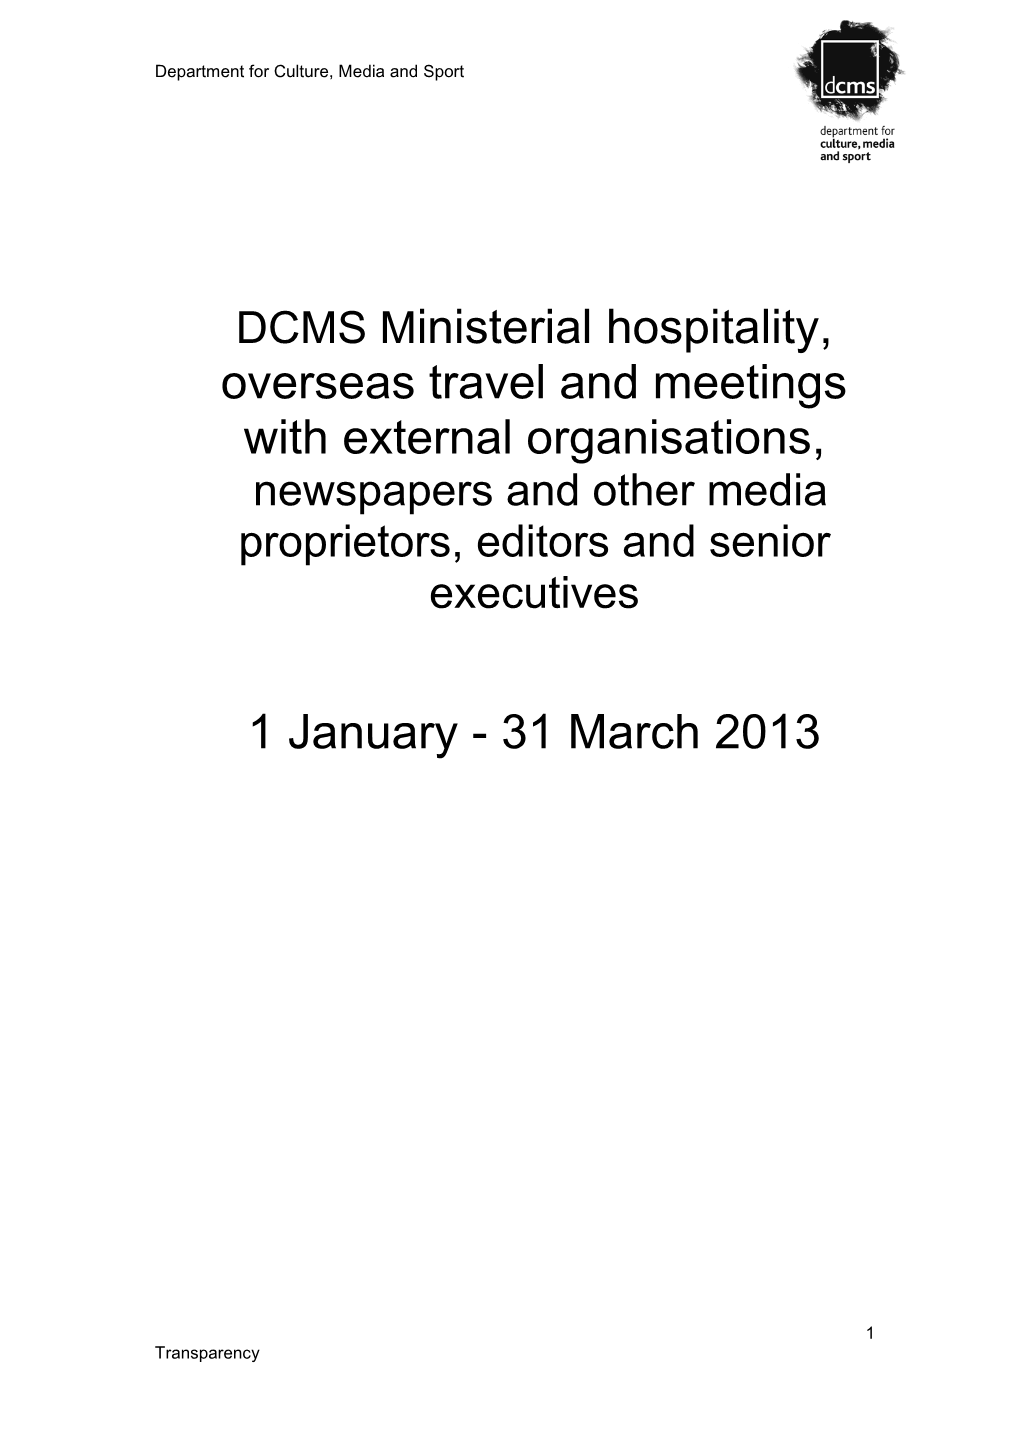 DCMS Ministerial Hospitality, Overseas Travel and Meetings with Outside